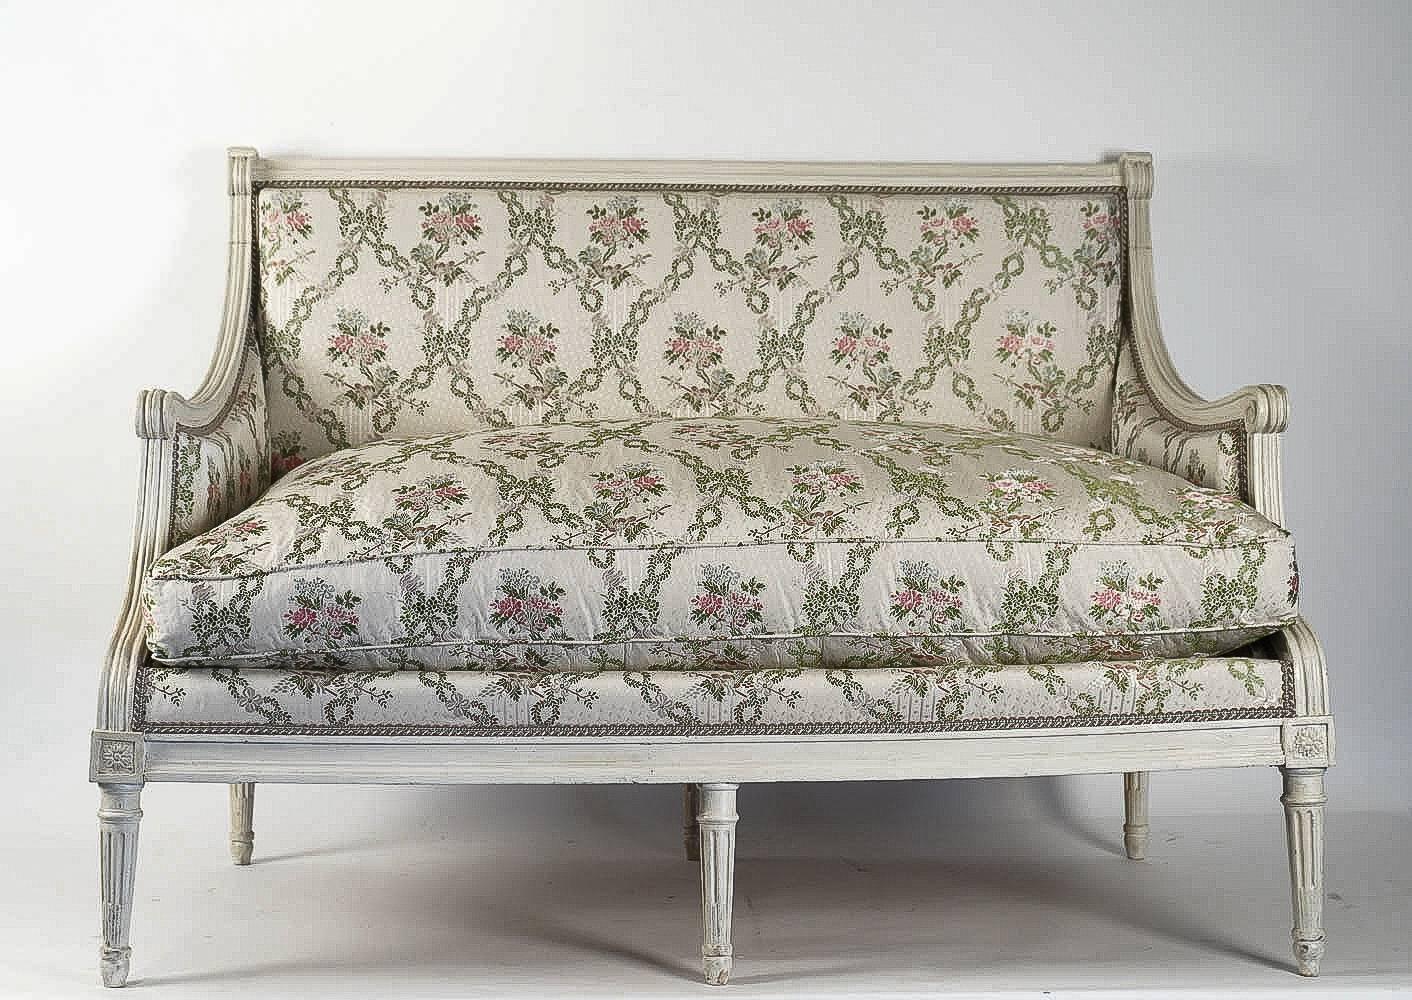 An elegant sofa in hand-carved and lacquered fruitwood in a classic Louis XVI style, attributed to Georges Jacob, circa 1780.

Our sofa is in excellent condition and there upholstered with a new beautiful floral silk fabric.

Dimensions: Sofa H